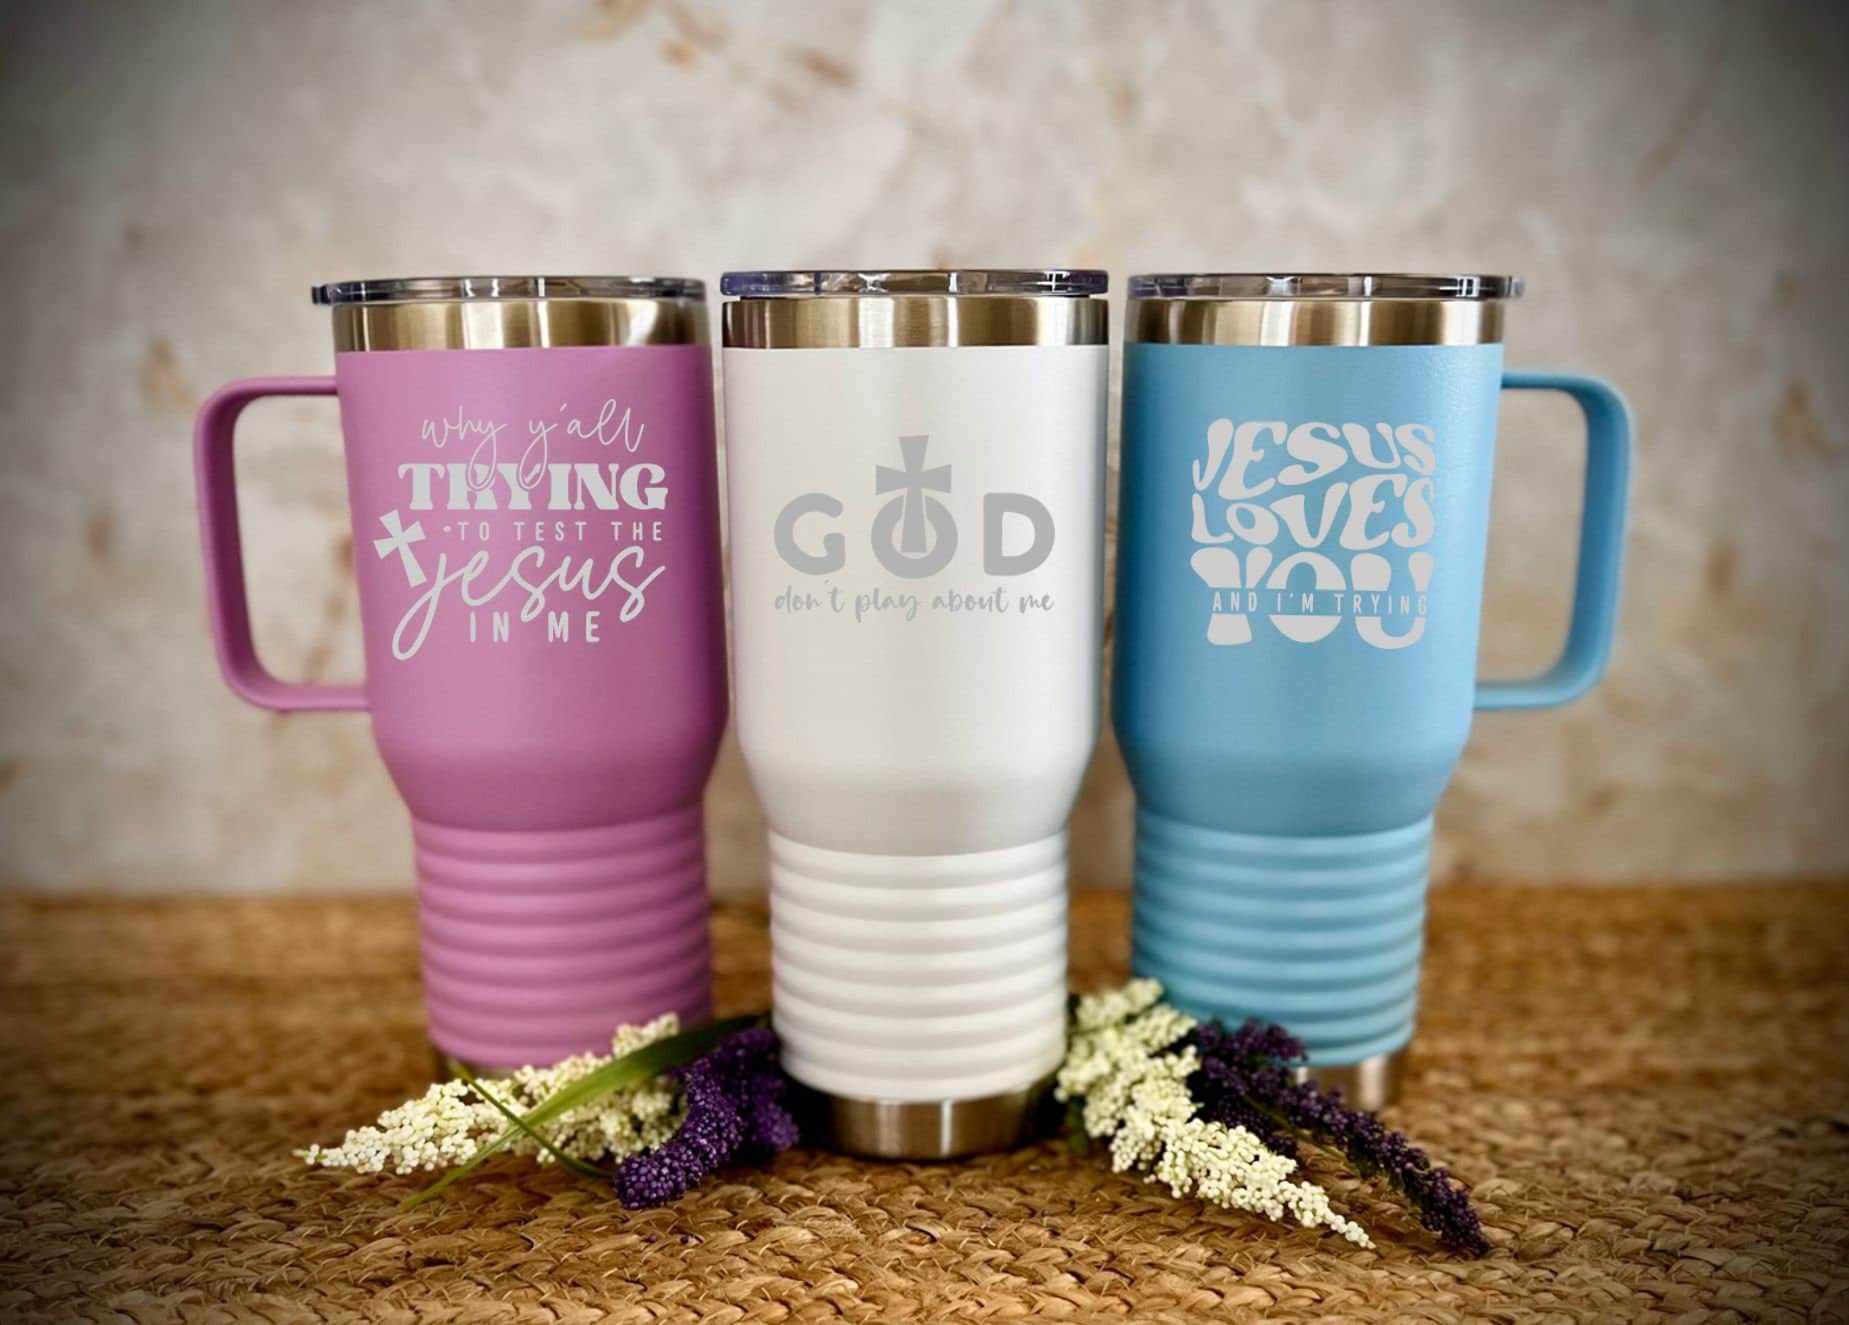 Fruit of the Spirit 20oz Glass Tumbler – Bibles and Coffee